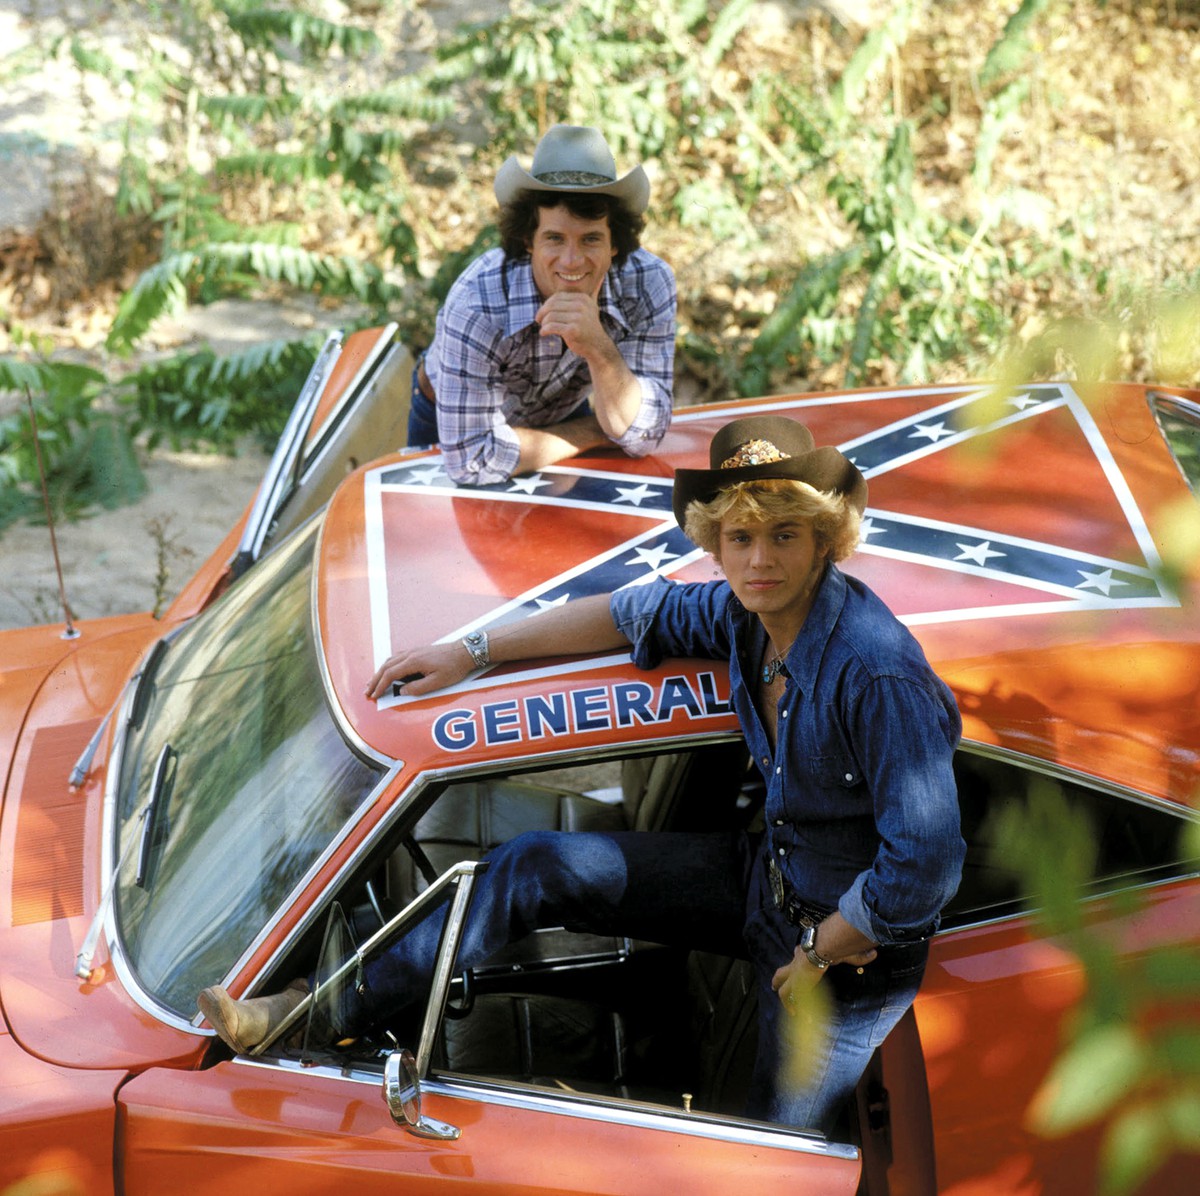 Owner Of DUKES OF HAZZARD’s General Lee Is Repainting The Roof!! 